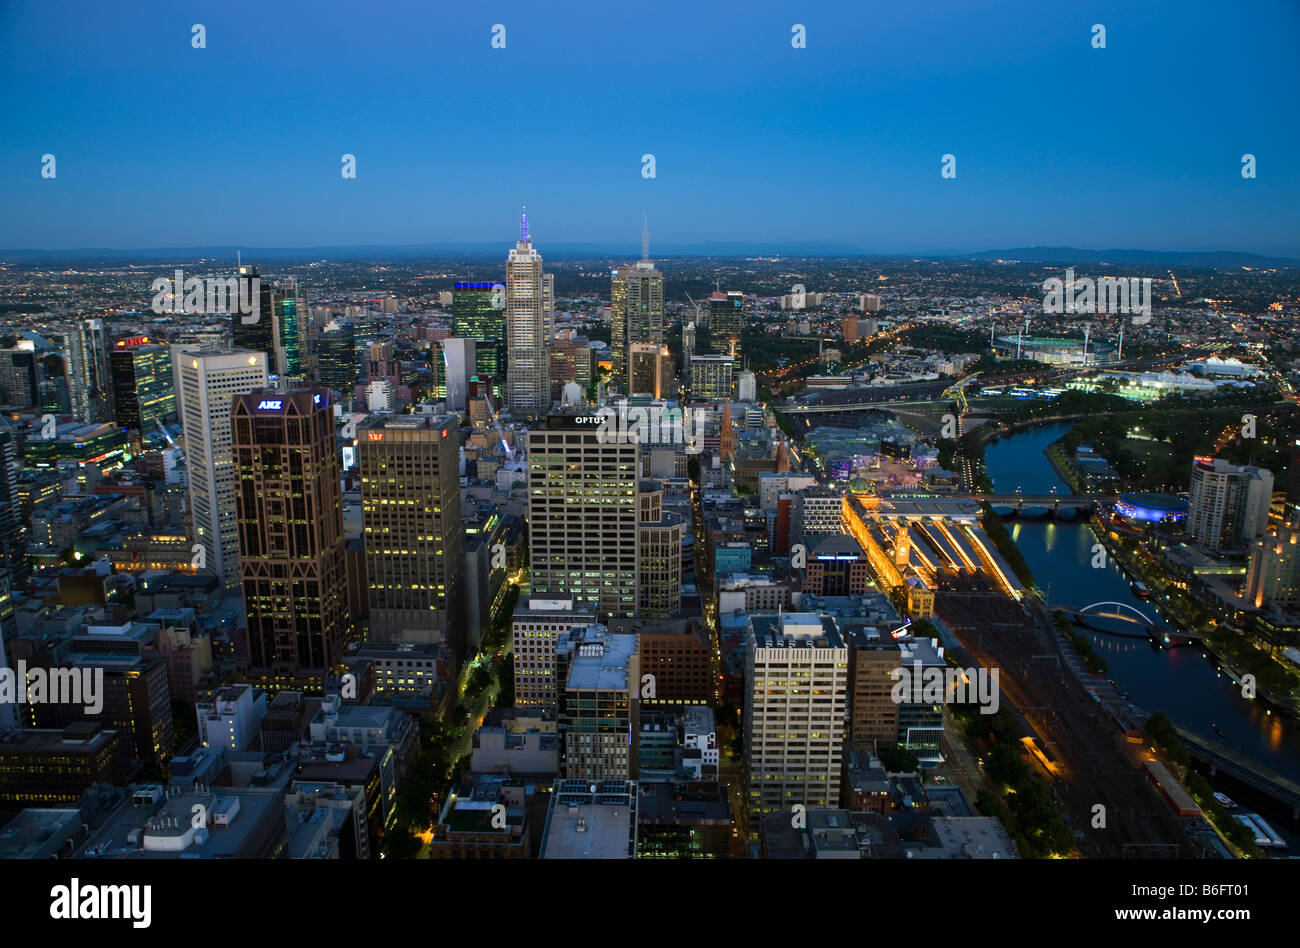 Aerial view of Melbourne, Victoria, Australia city skyline and buildings at dusk Stock Photo